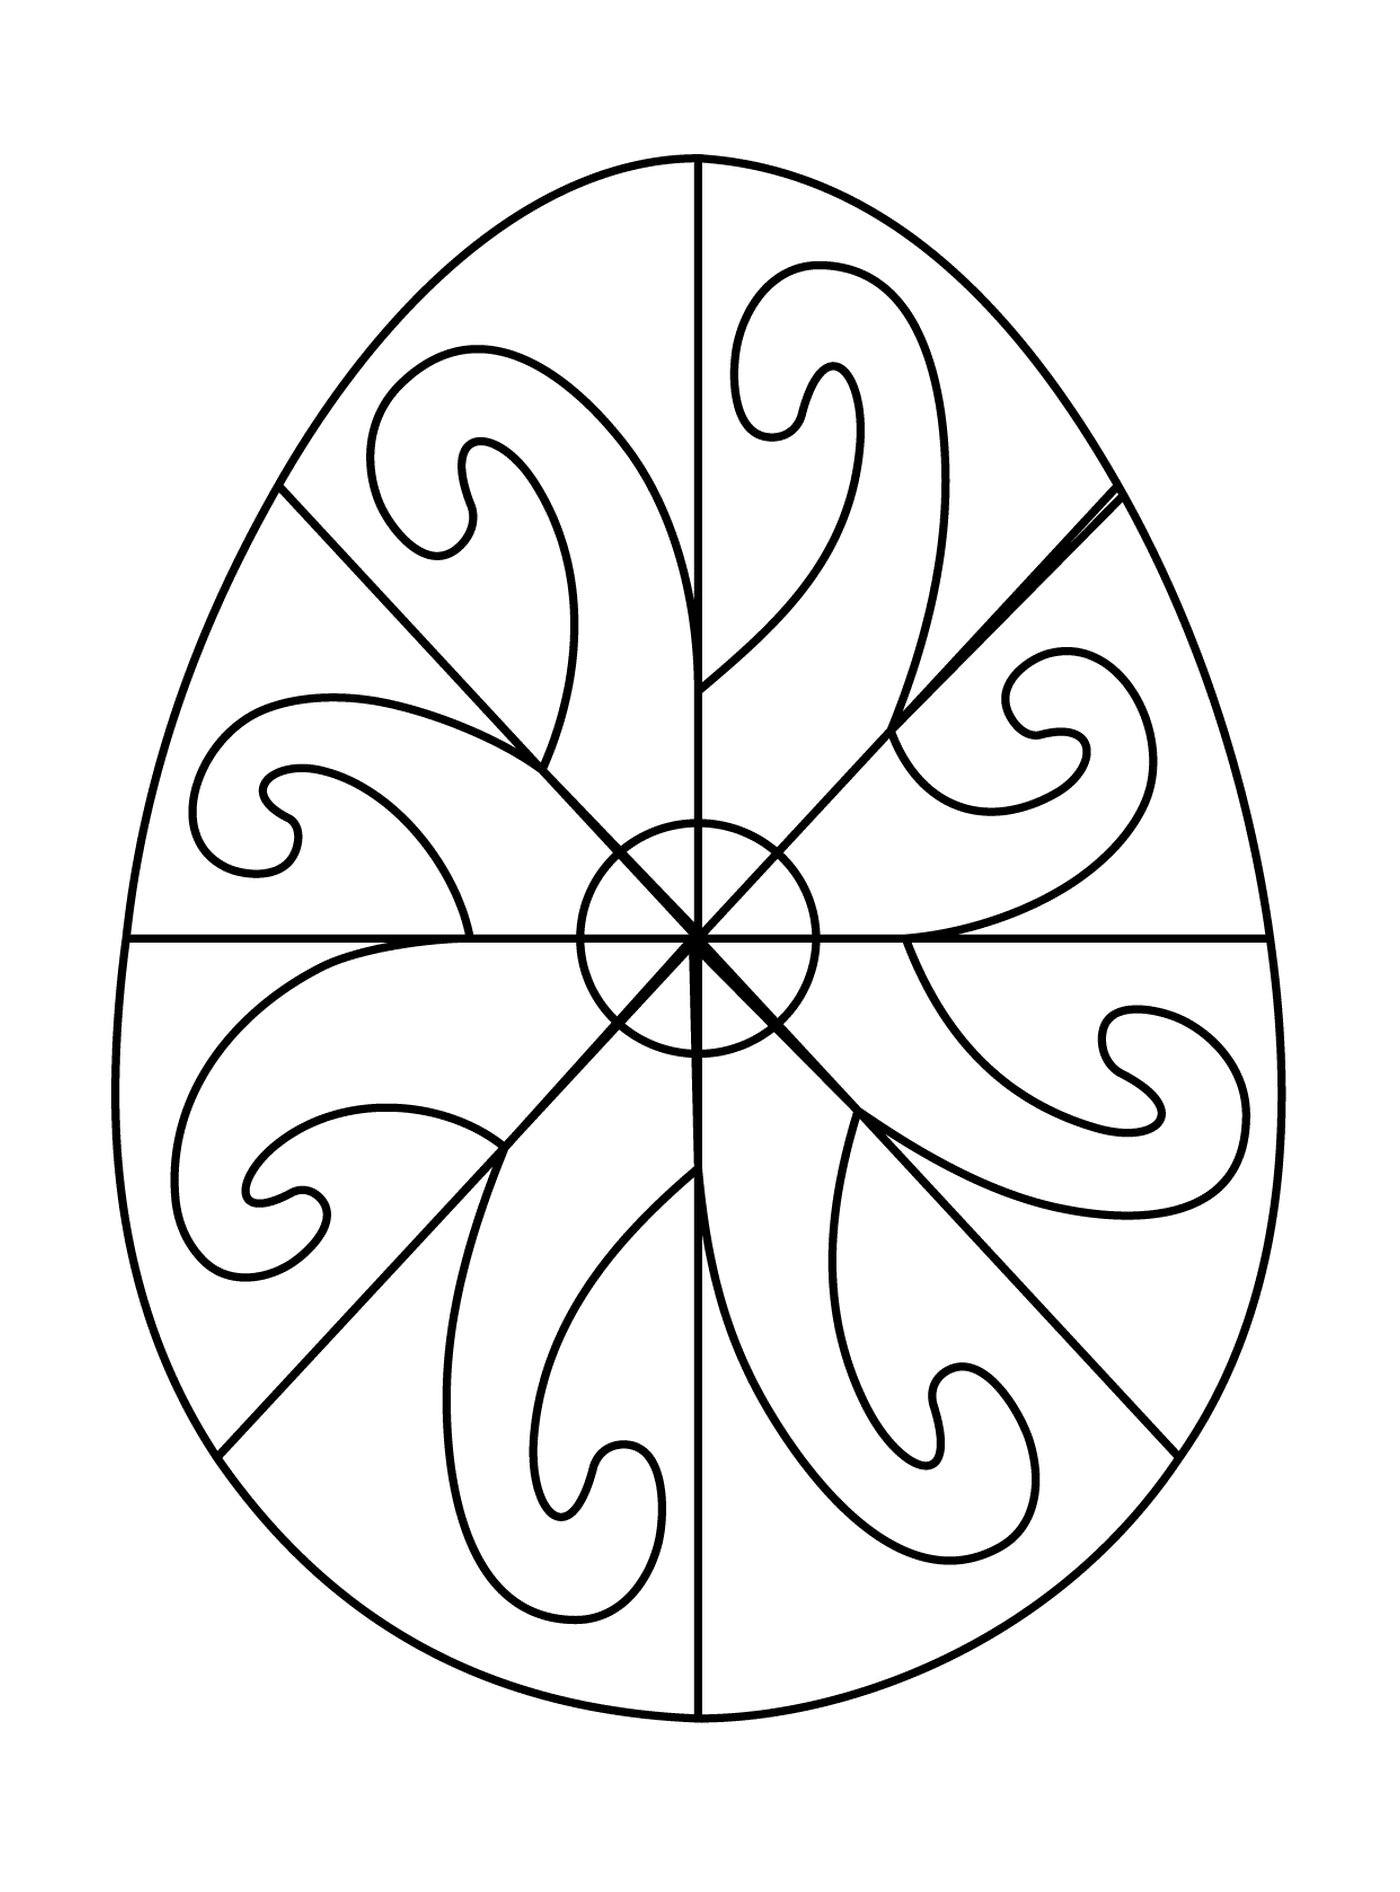  Easter egg with spiral pattern 